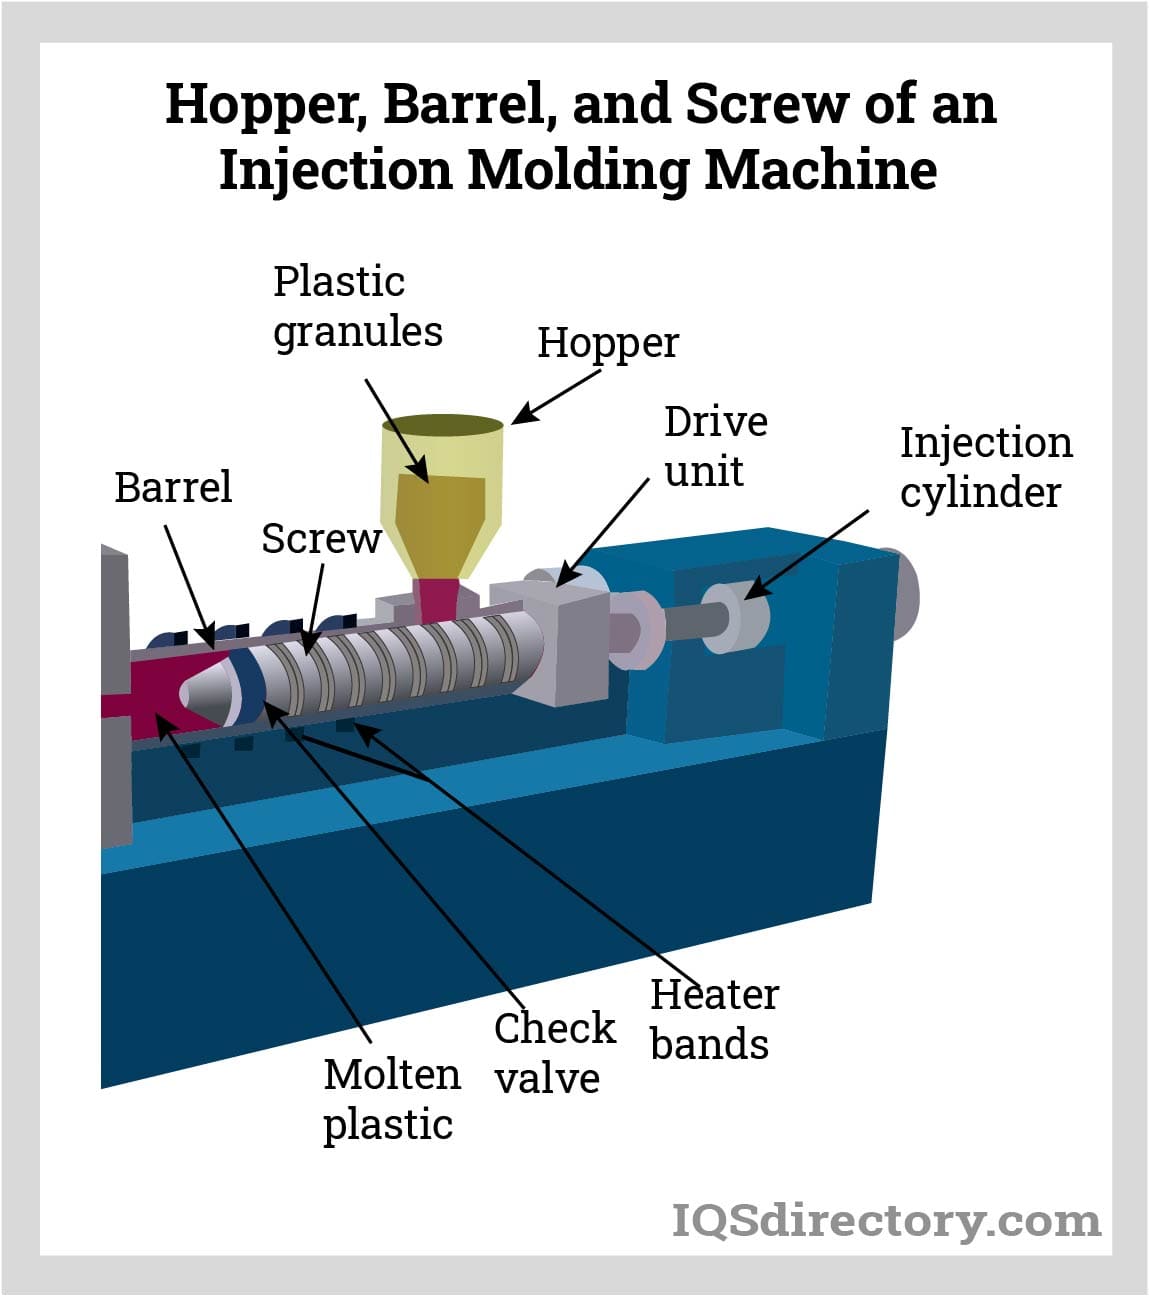 Hopper, Barrel, and Screw of an Injection Molding Machine